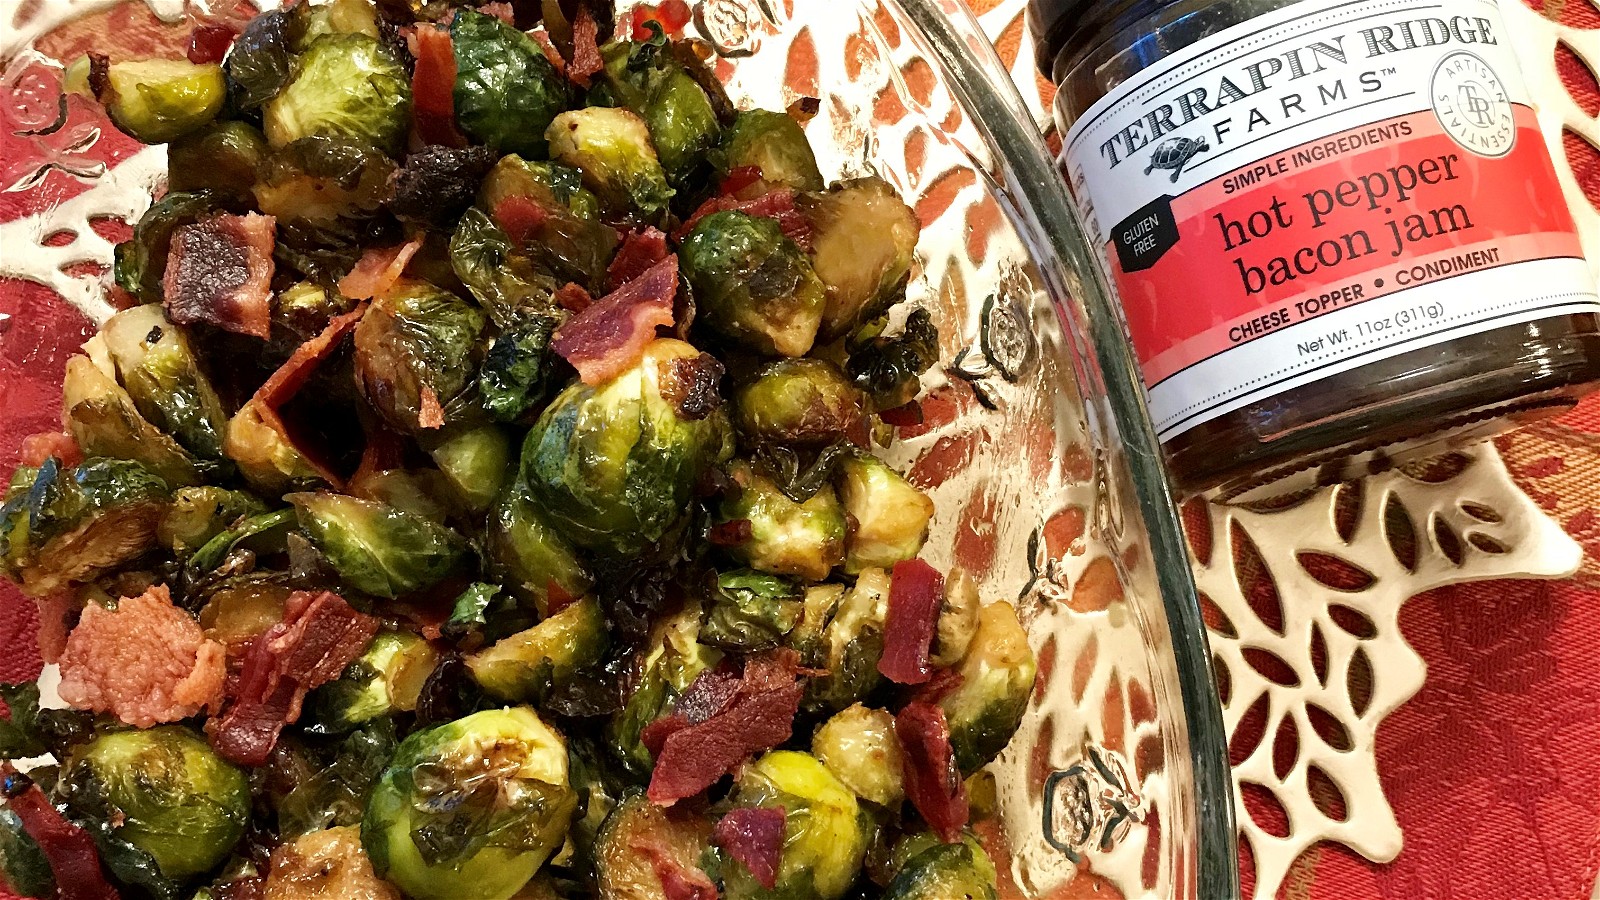 Image of Brussel Sprouts with the BEST Bacon Jam